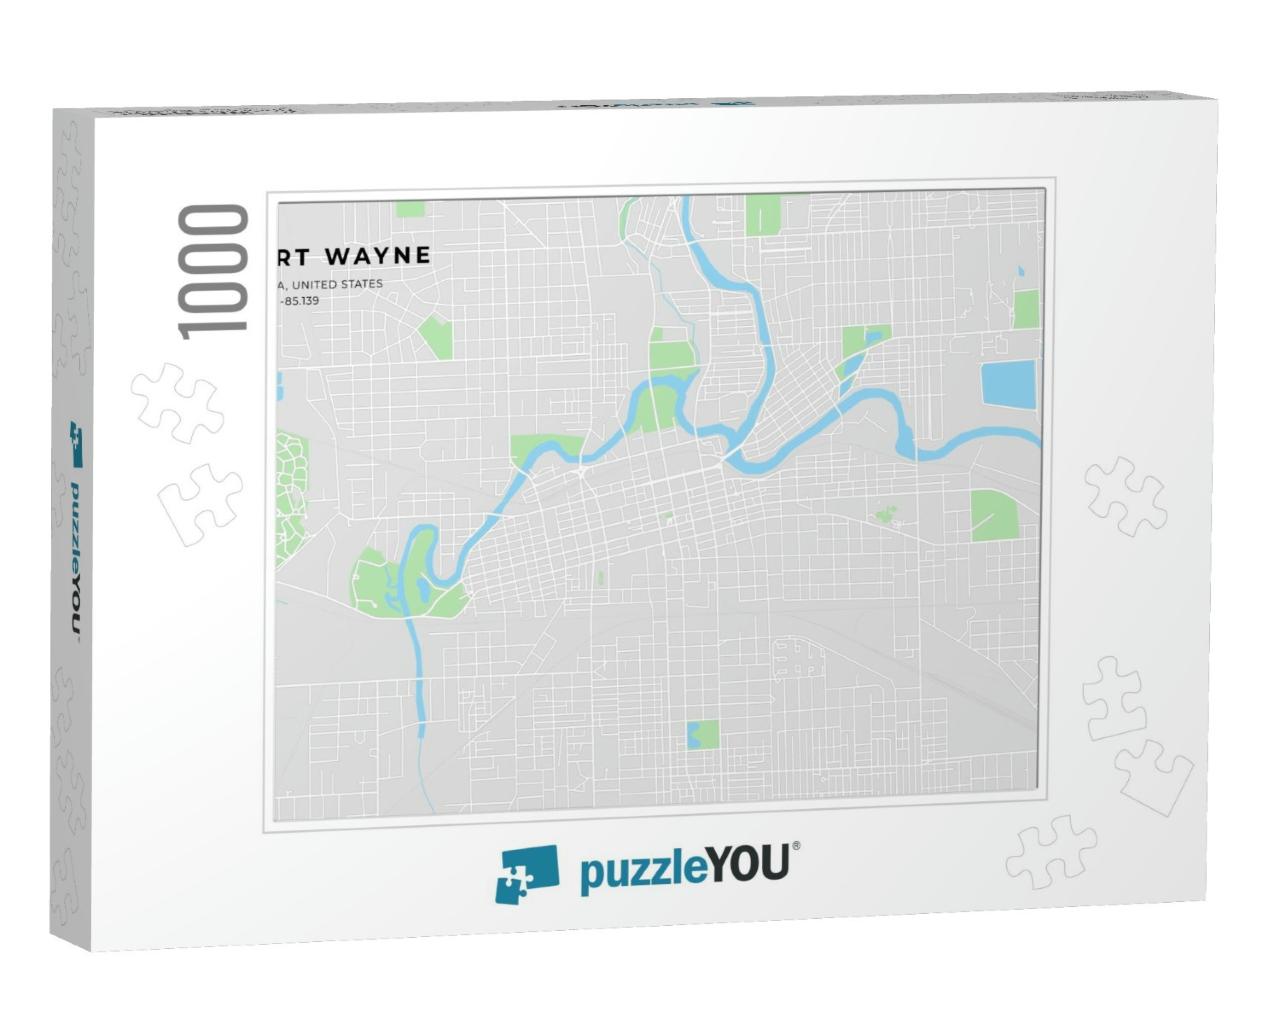 Printable Street Map of Fort Wayne Including Highways, Ma... Jigsaw Puzzle with 1000 pieces